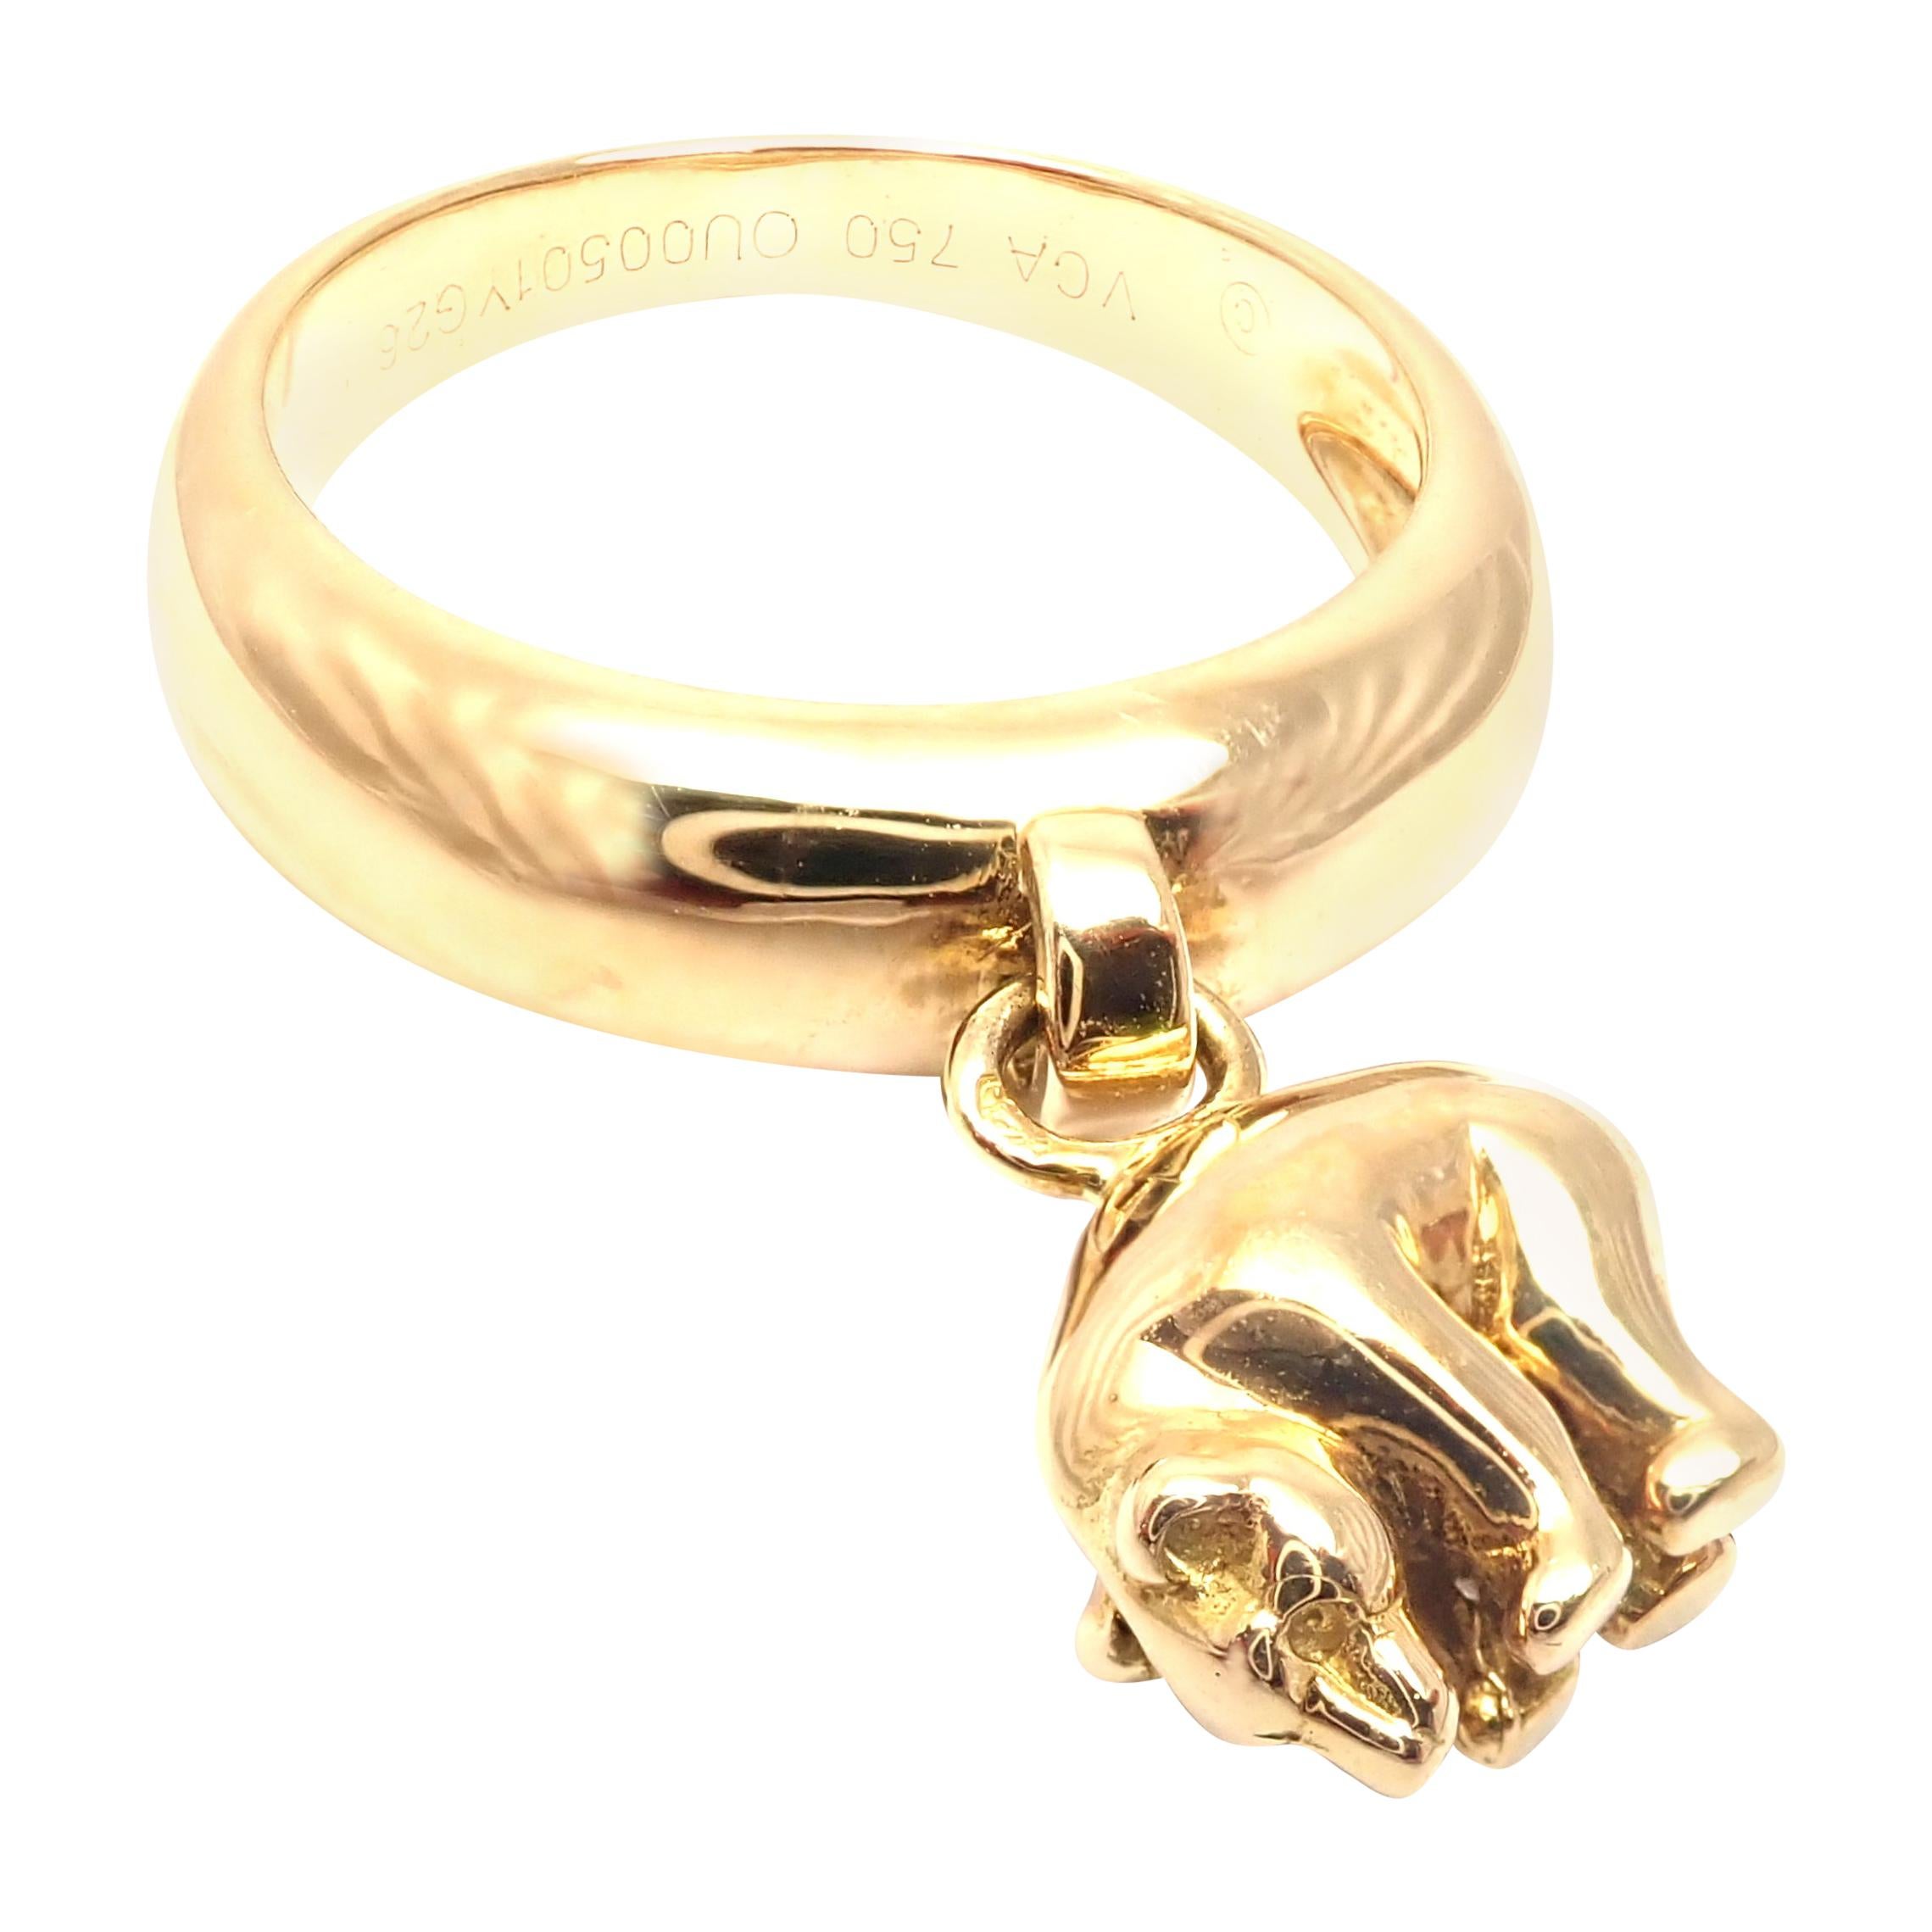 Vintage Van Cleef & Arpels Bear Charm Yellow Gold Band Ring